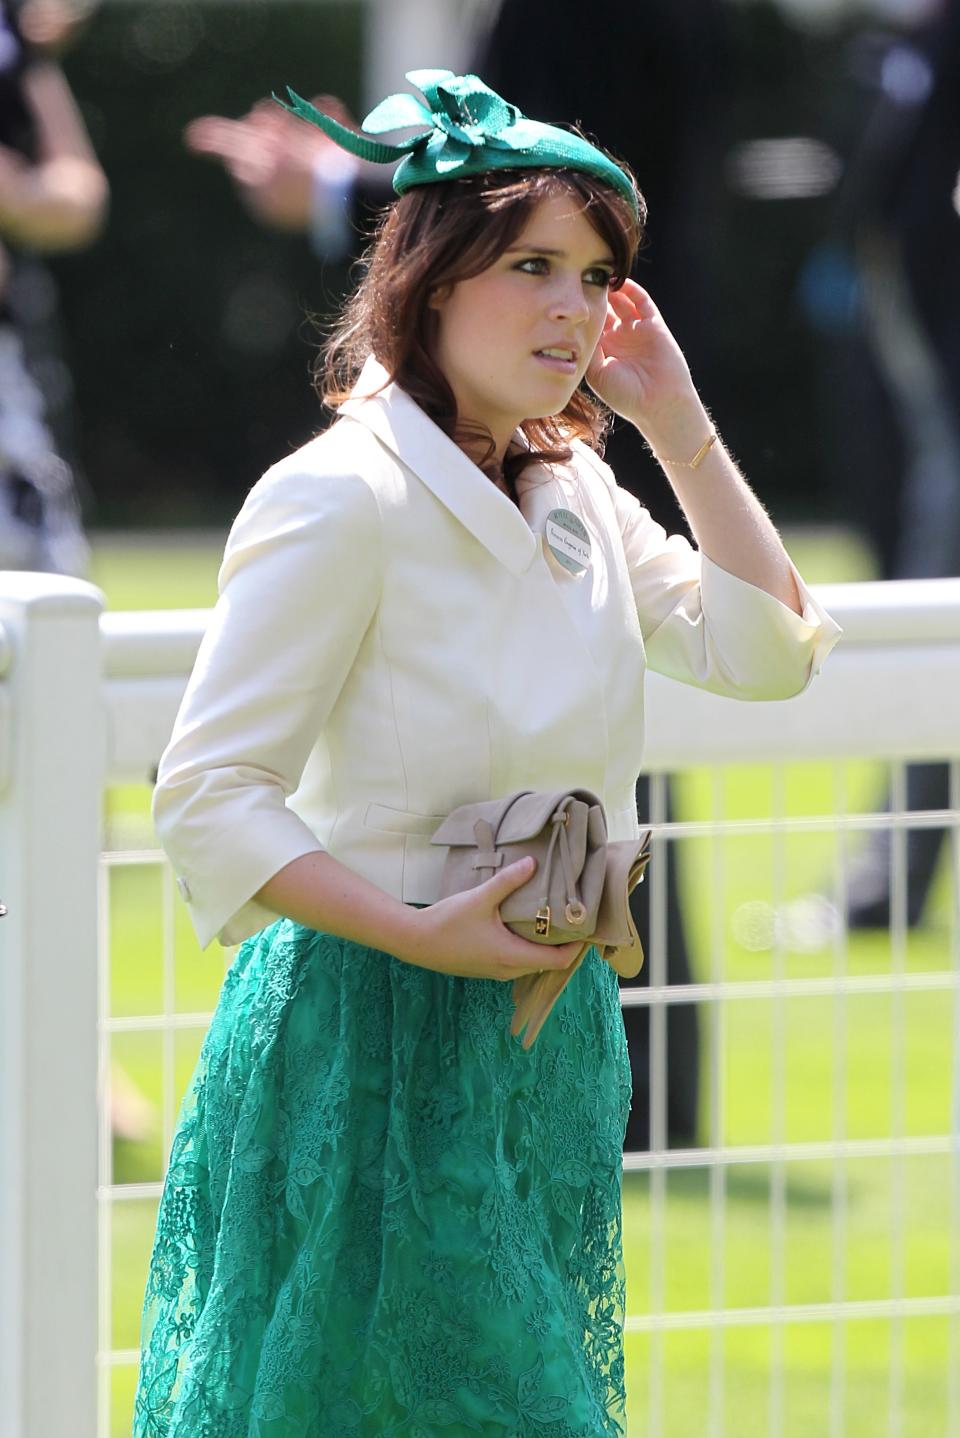 File photo dated 14/06/11 of Princess Eugenie during day one of the 2011 Royal Ascot Meeting. The hat that she was wearing is amongst those in the Chinoiserie-on-Sea exhibition at the Royal Pavilion, Brighton, East Sussex, showcasing dozens of hats made by milliner Stephen Jones throughout his 40-year career.